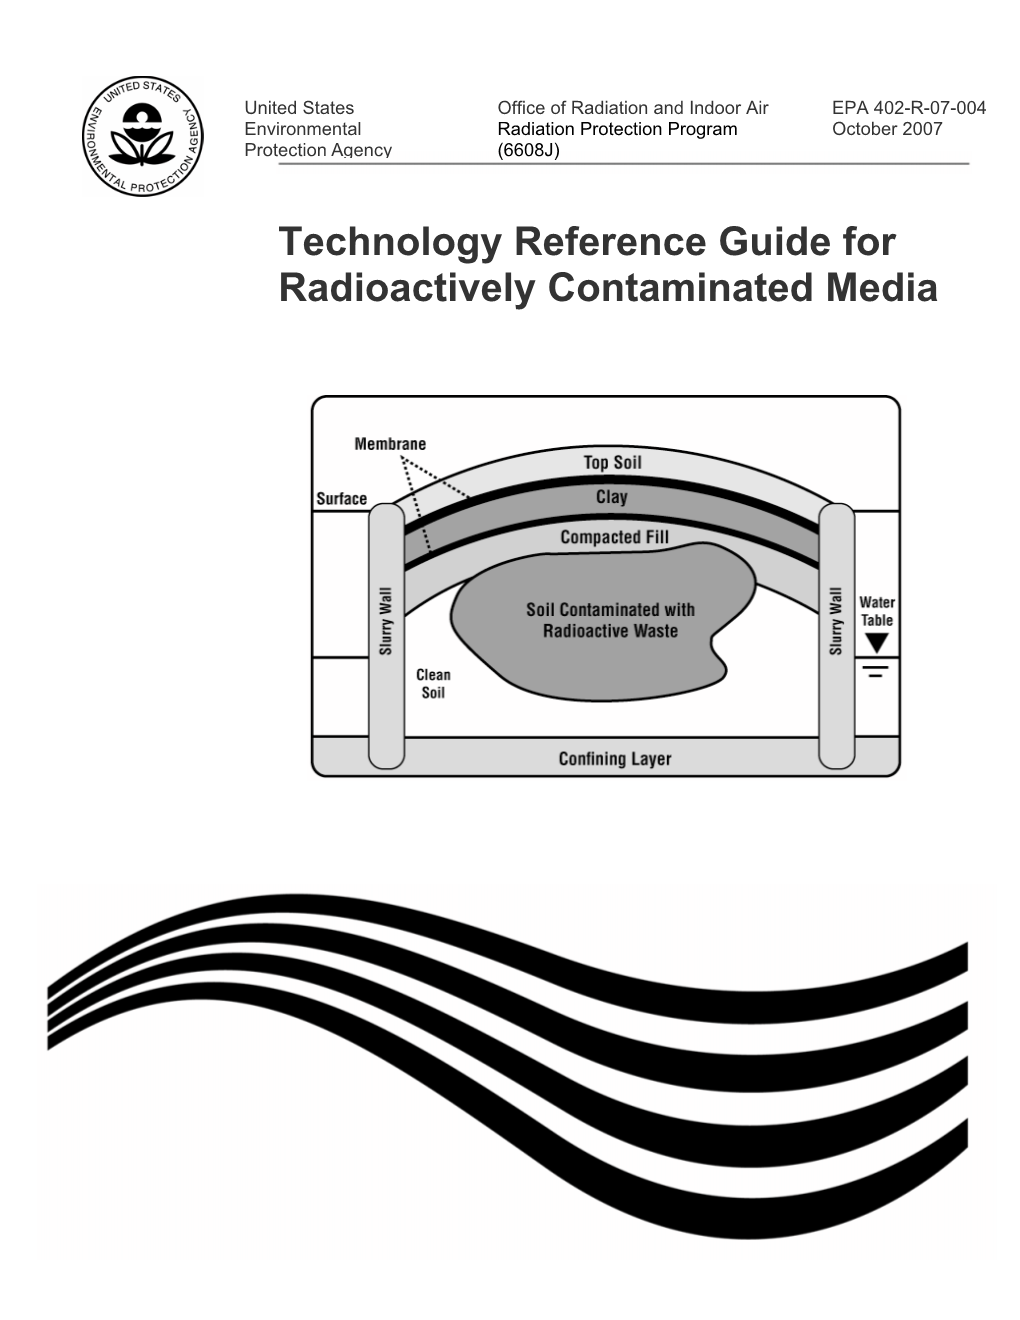 Technology Reference Guide for Radioactively Contaminated Media